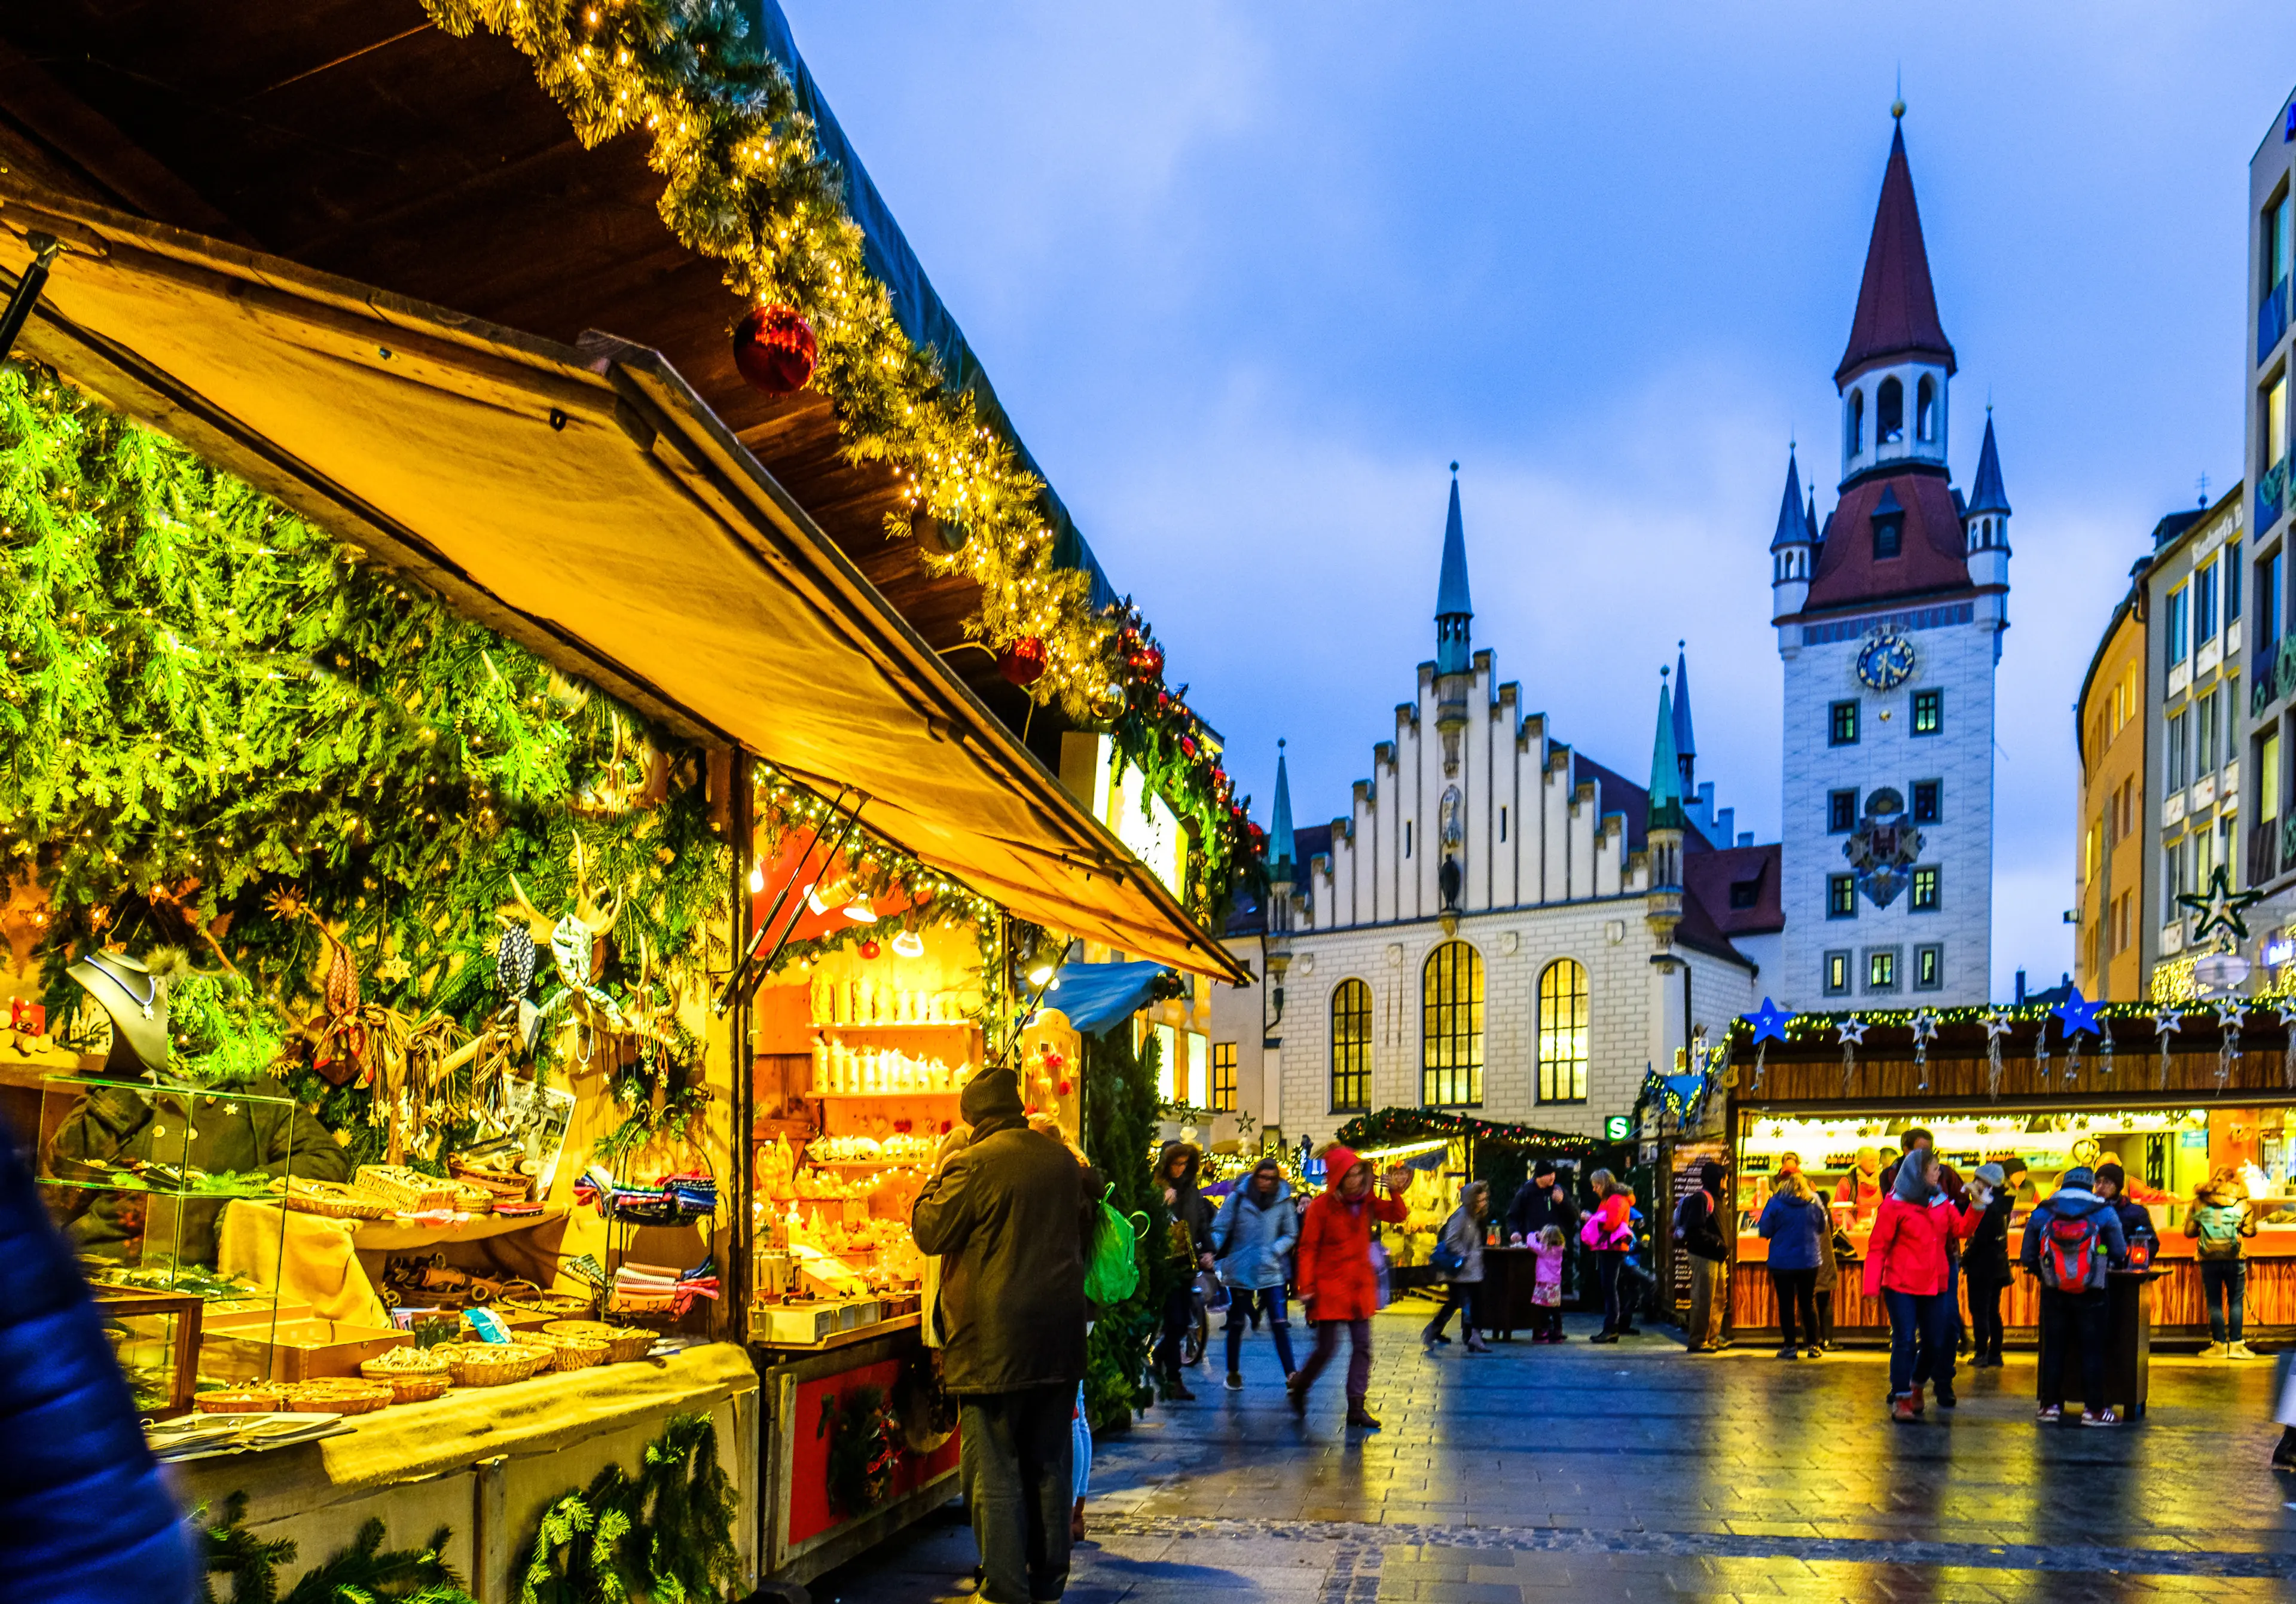 5-Day Christmas Holiday Experience in Munich, Germany